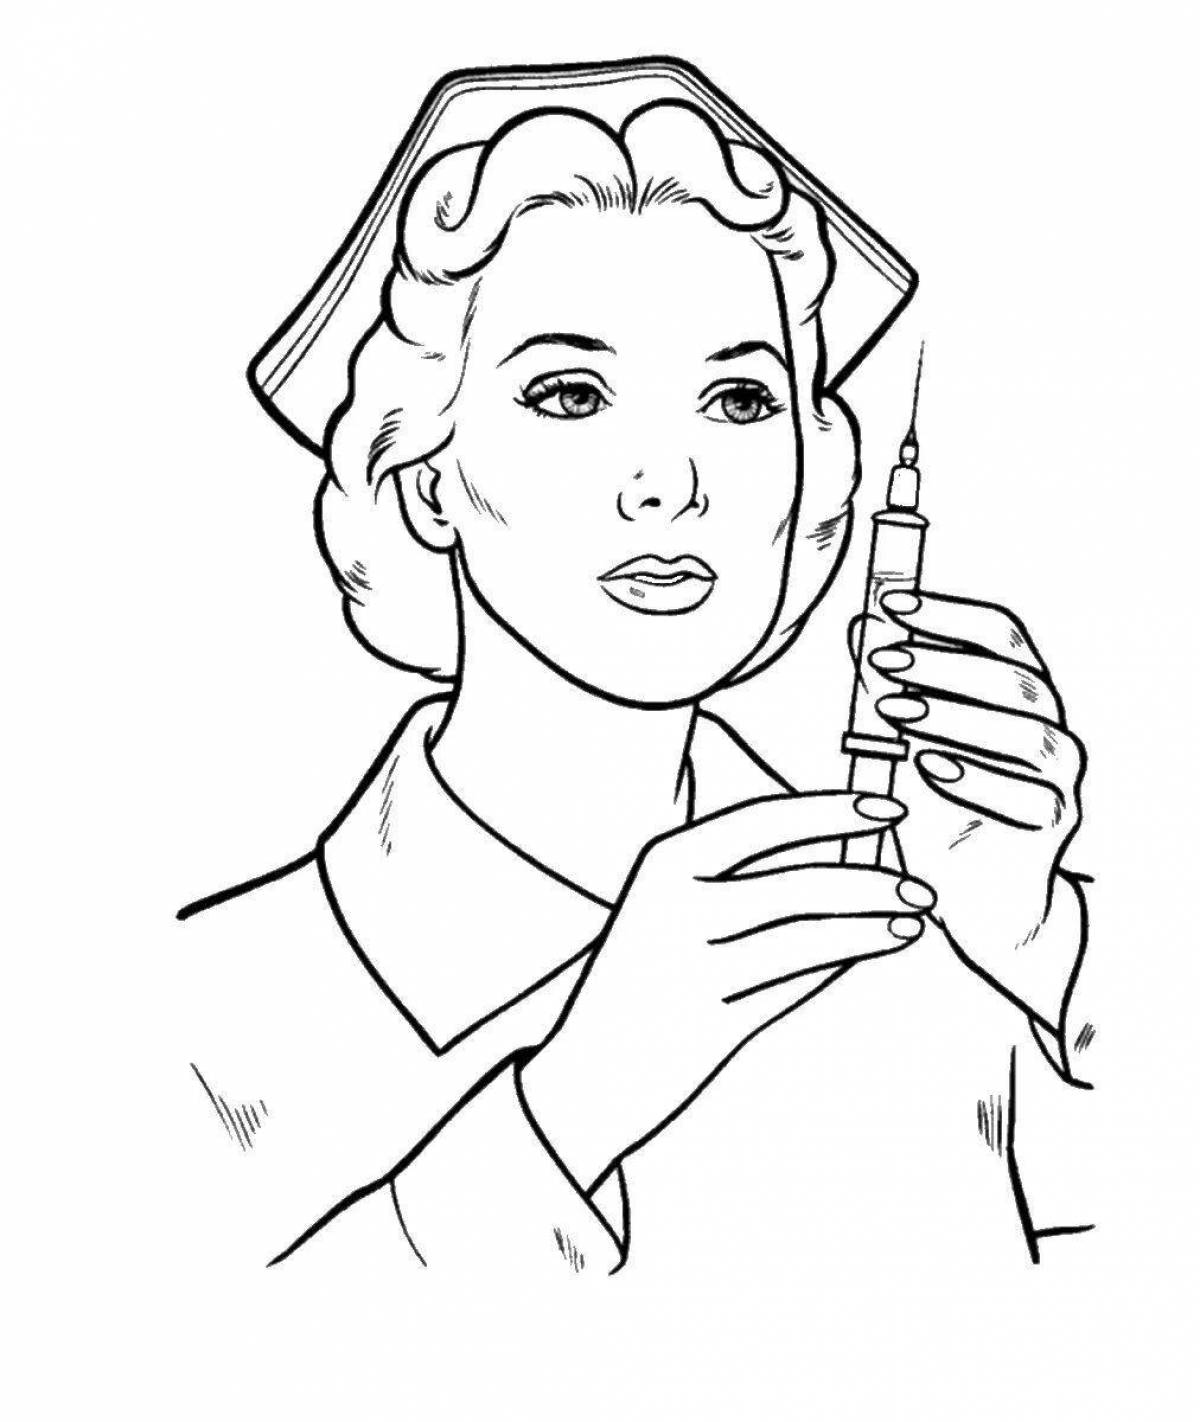 Vogue coloring page борьба за щеки модницы